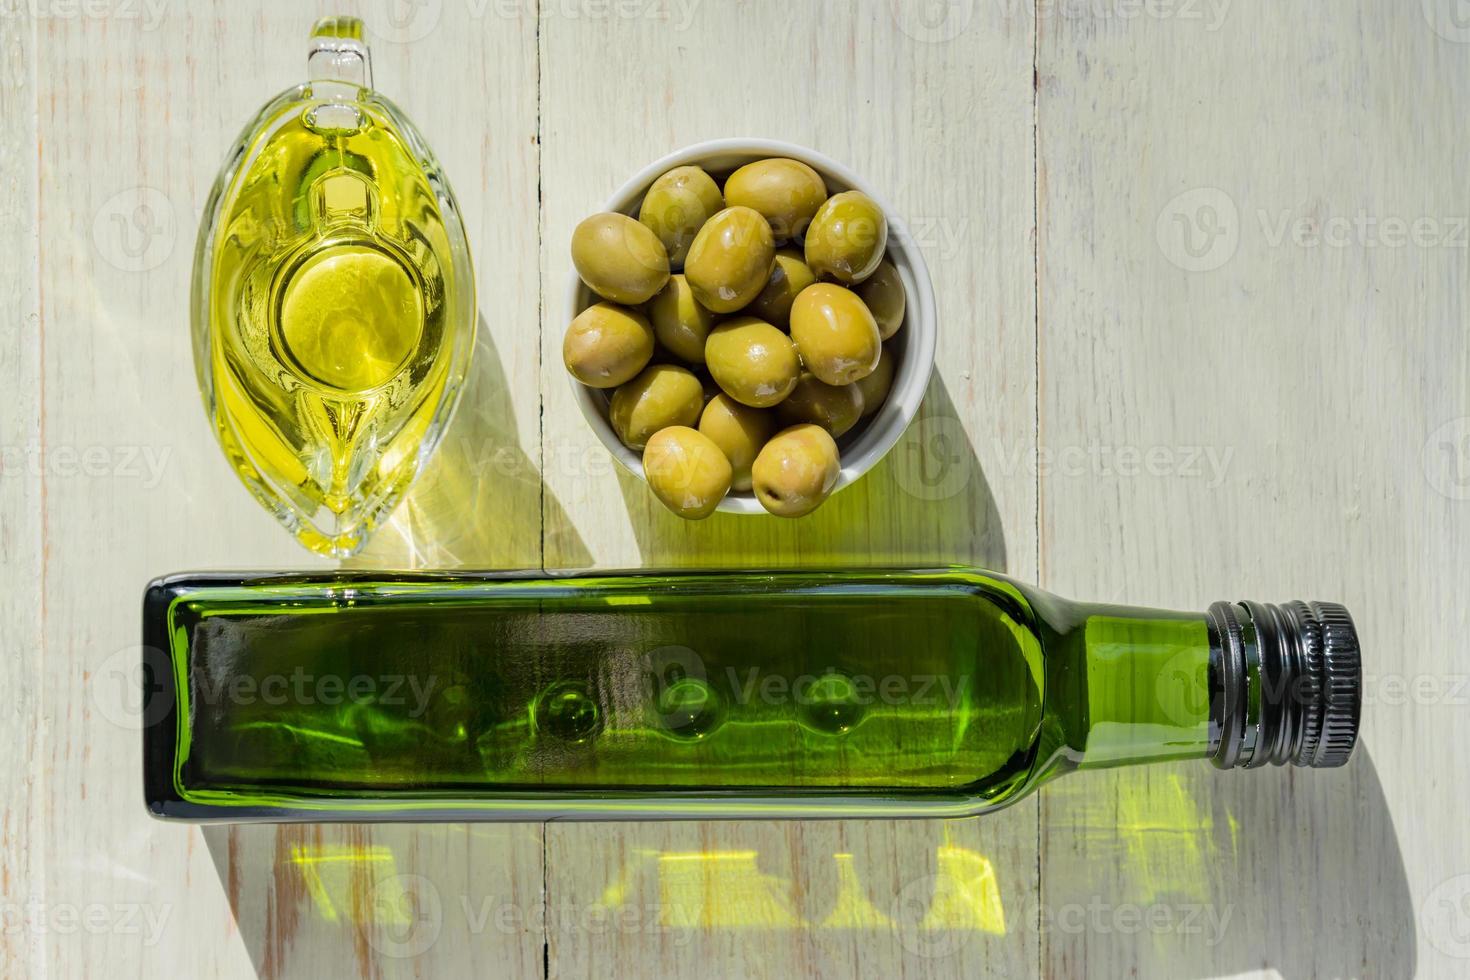 glass sauceboat with extra virgin olive oil, fresh green olives and bottle on wooden table. photo